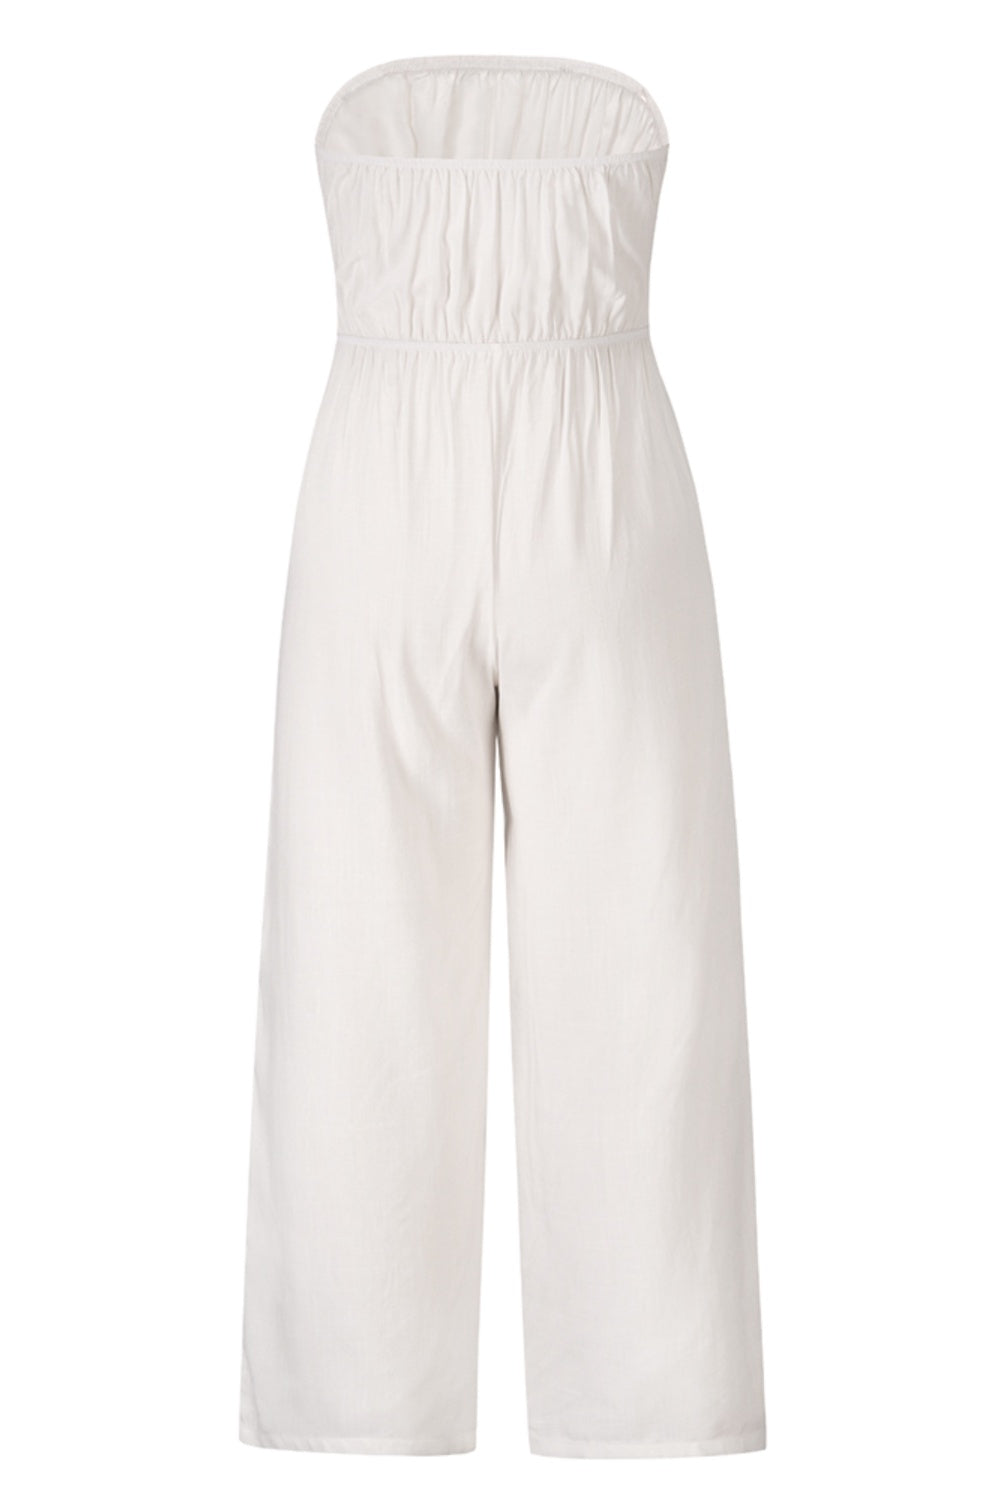 Tied Cutout Tube Wide Leg Jumpsuit by Coco Charli